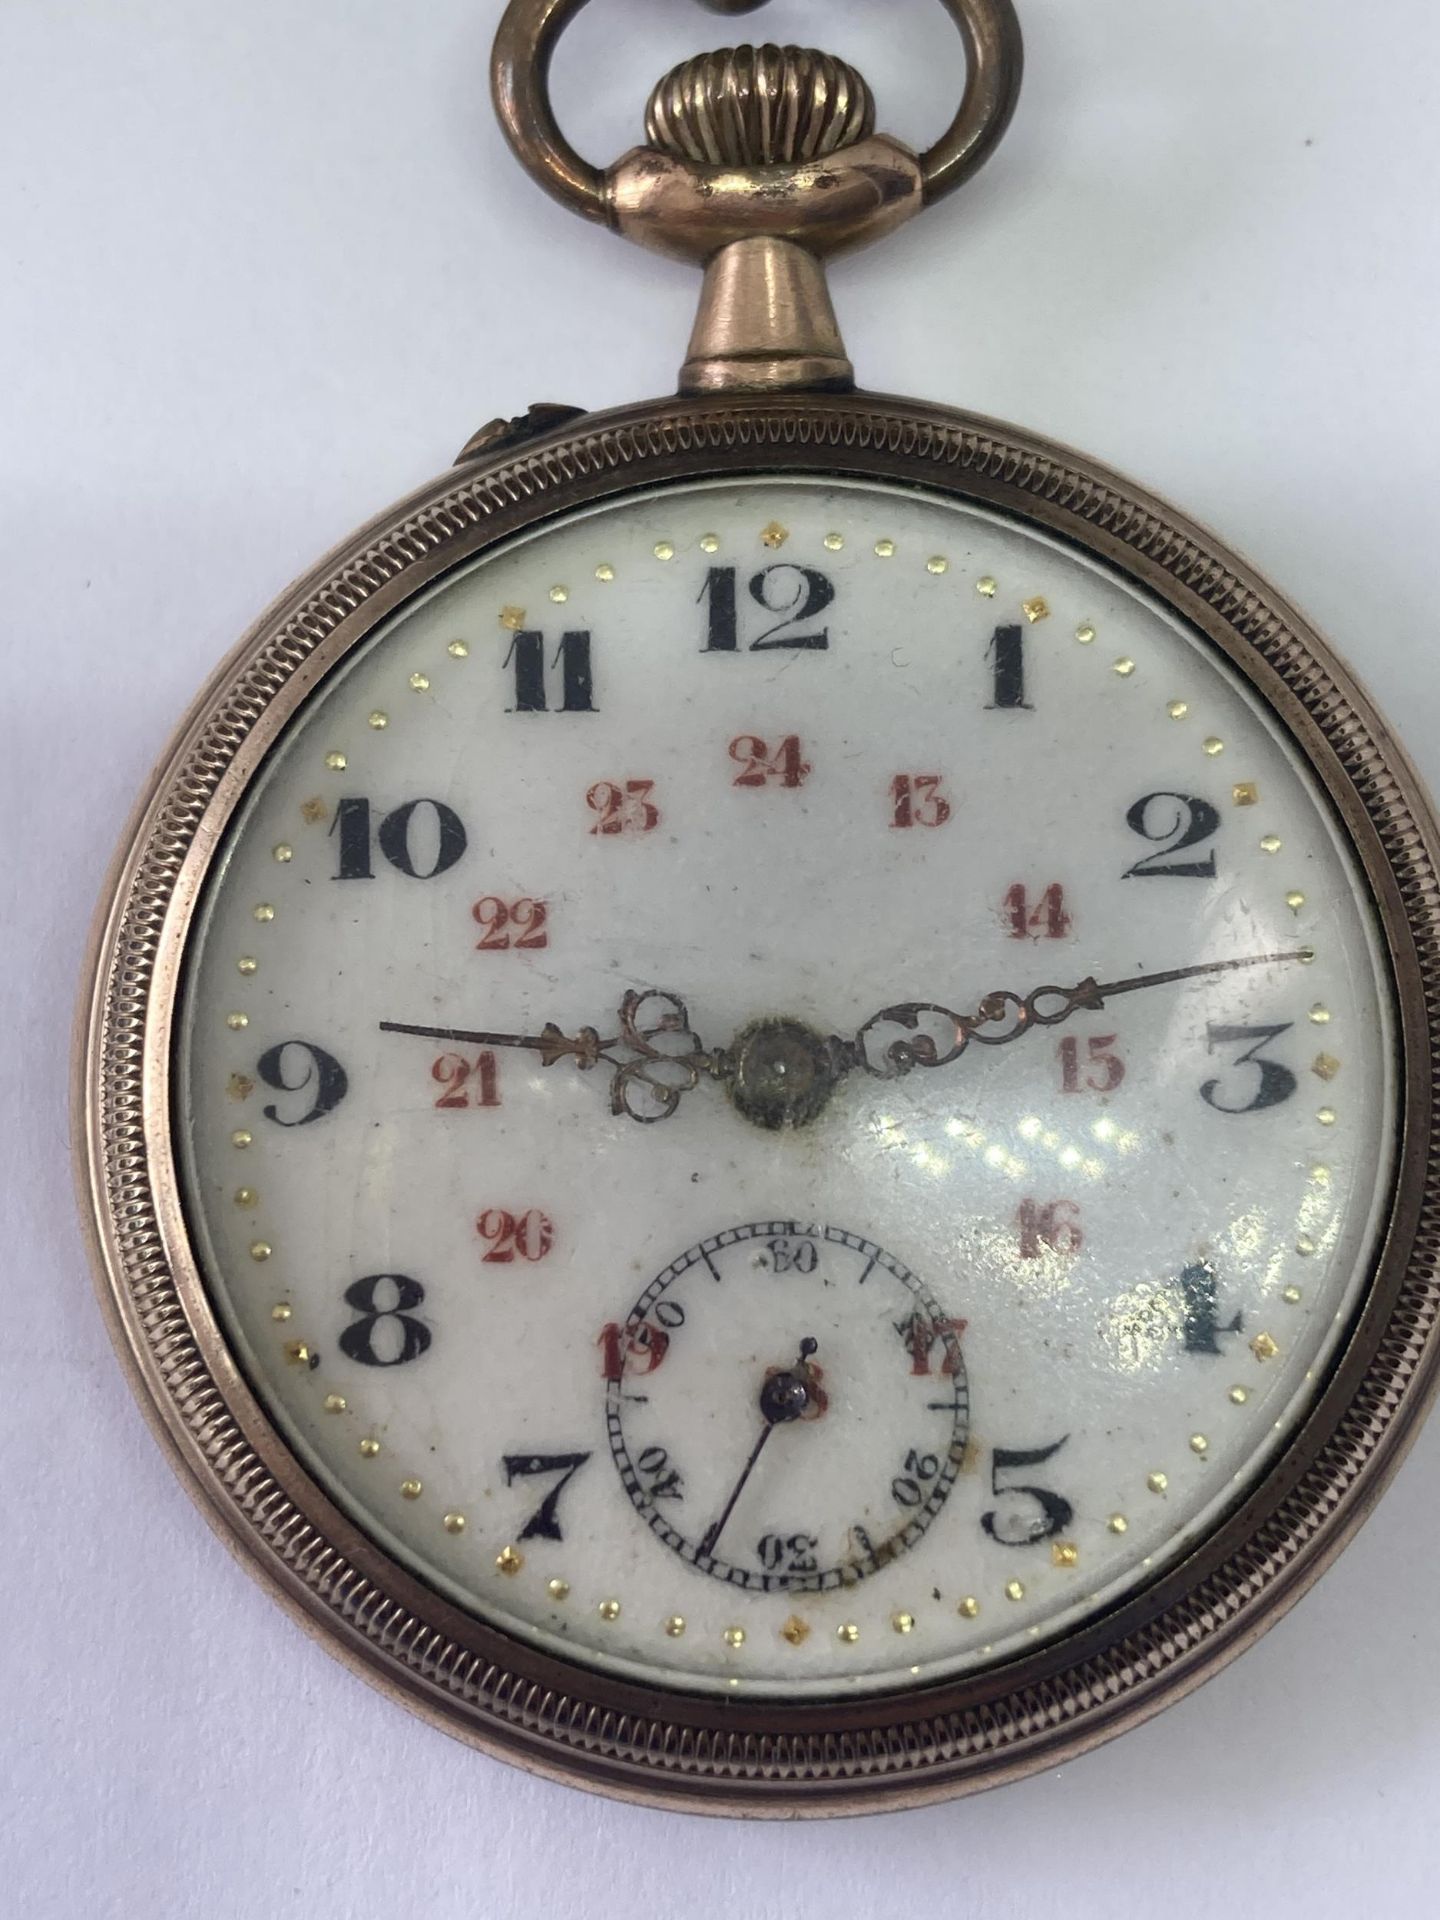 A GOLD PLATED POCKET WATCH WITH CHAIN - Image 2 of 3